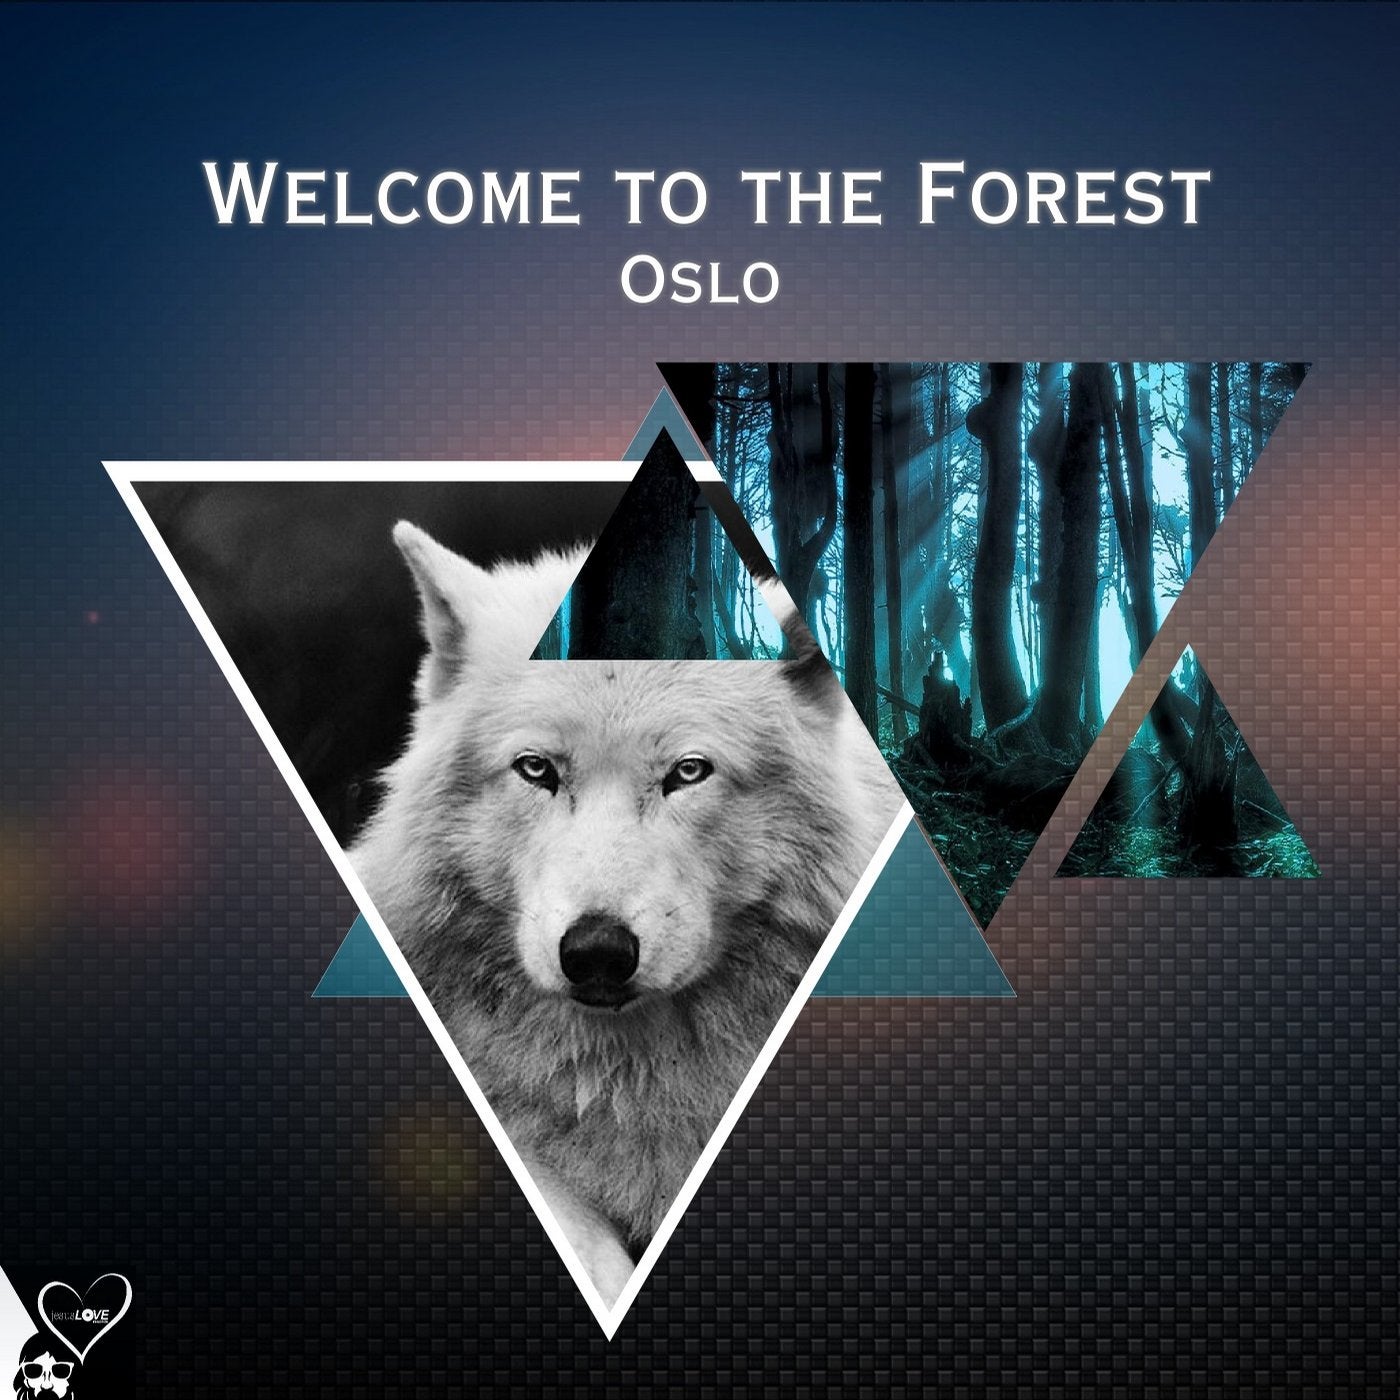 Welcome to the Forest